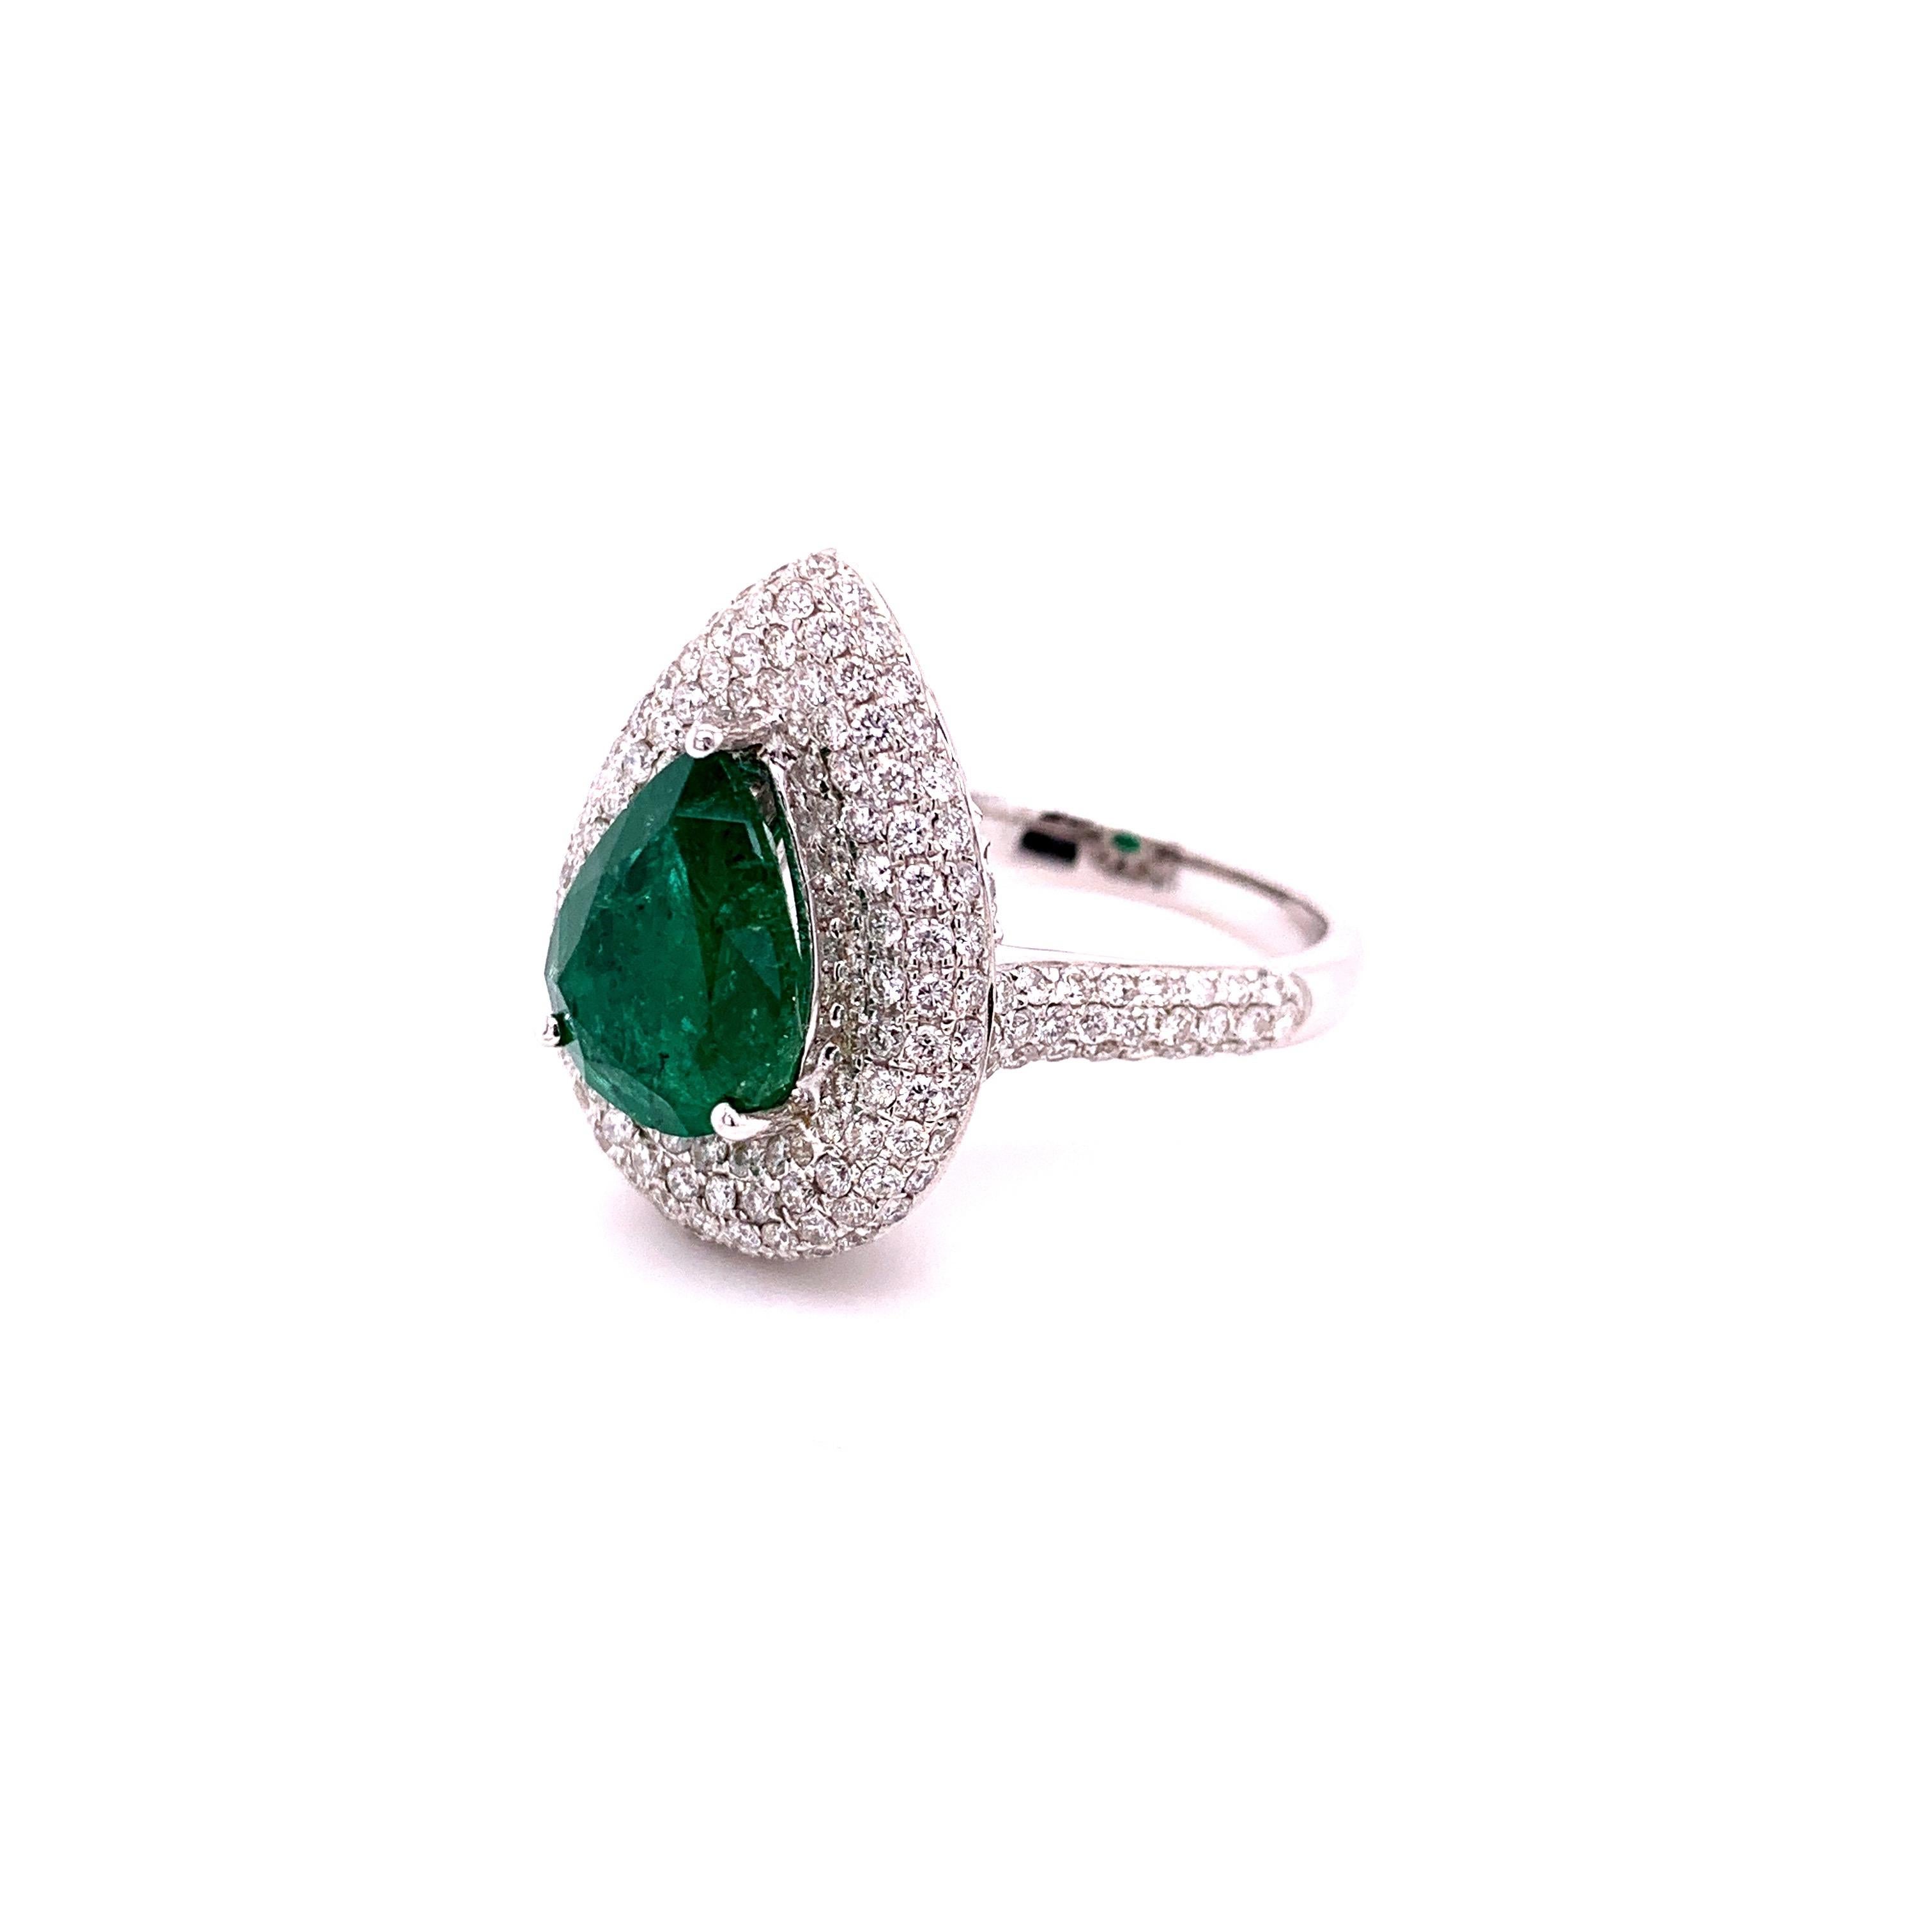 Contemporary 3.10 Carat Emerald Diamond Cocktail Ring For Sale